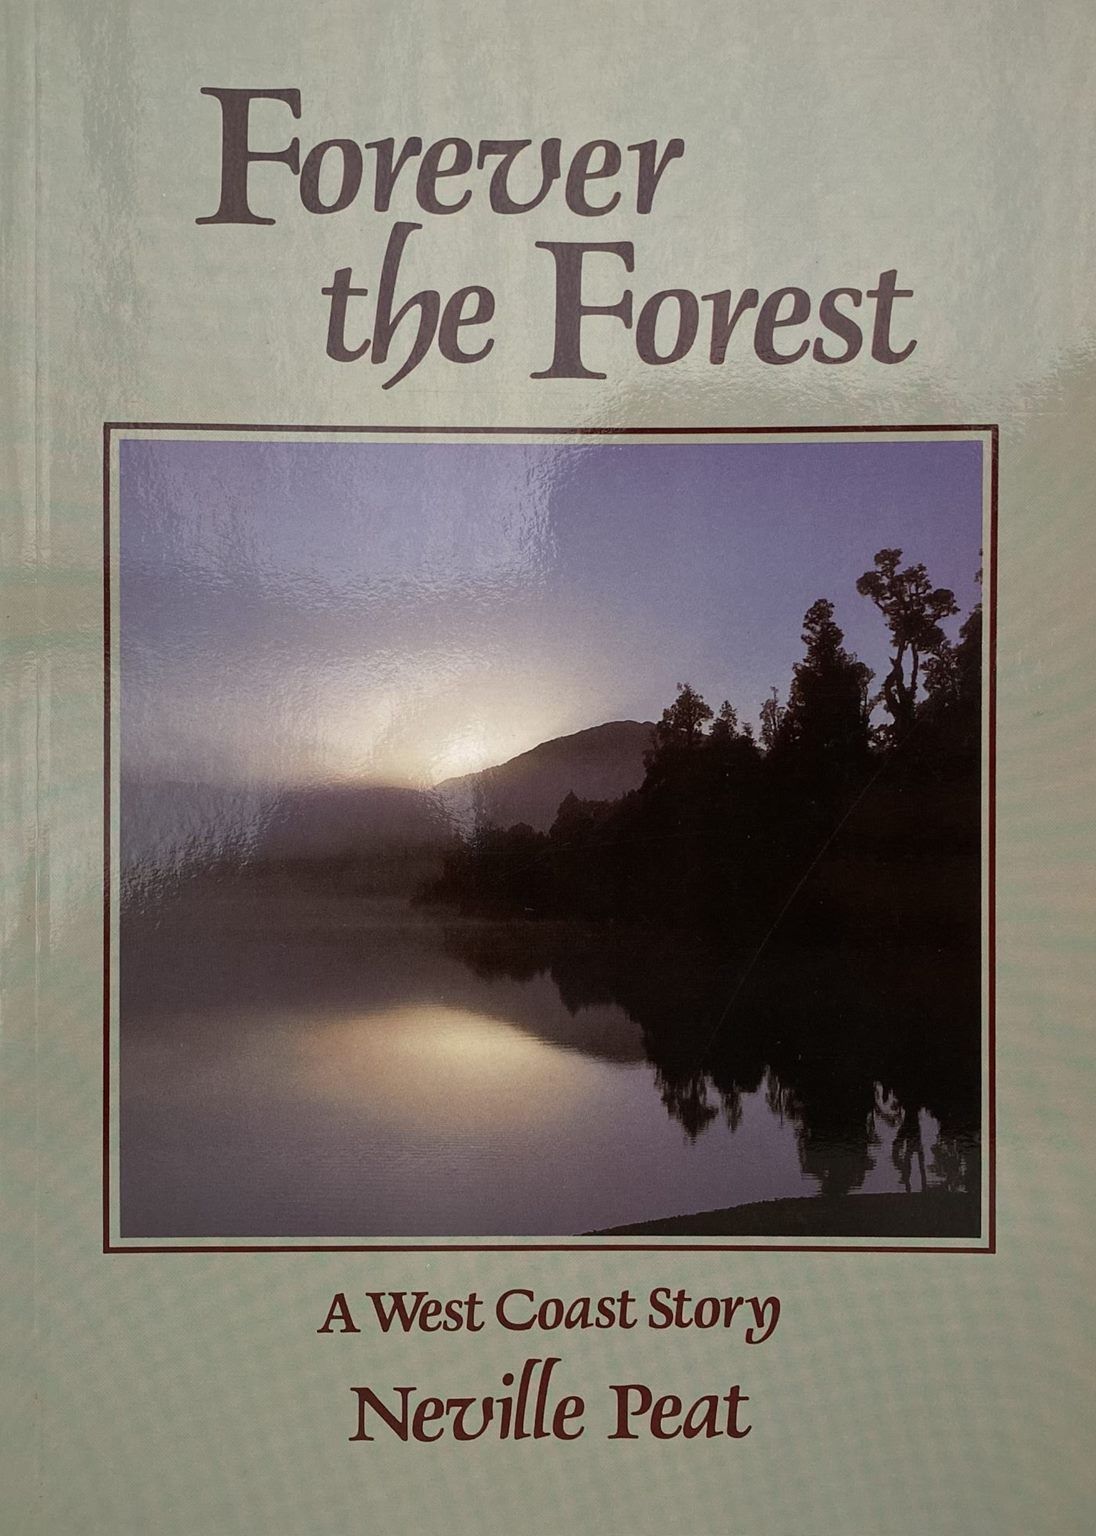 FOREVER THE FOREST: A West Coast Story